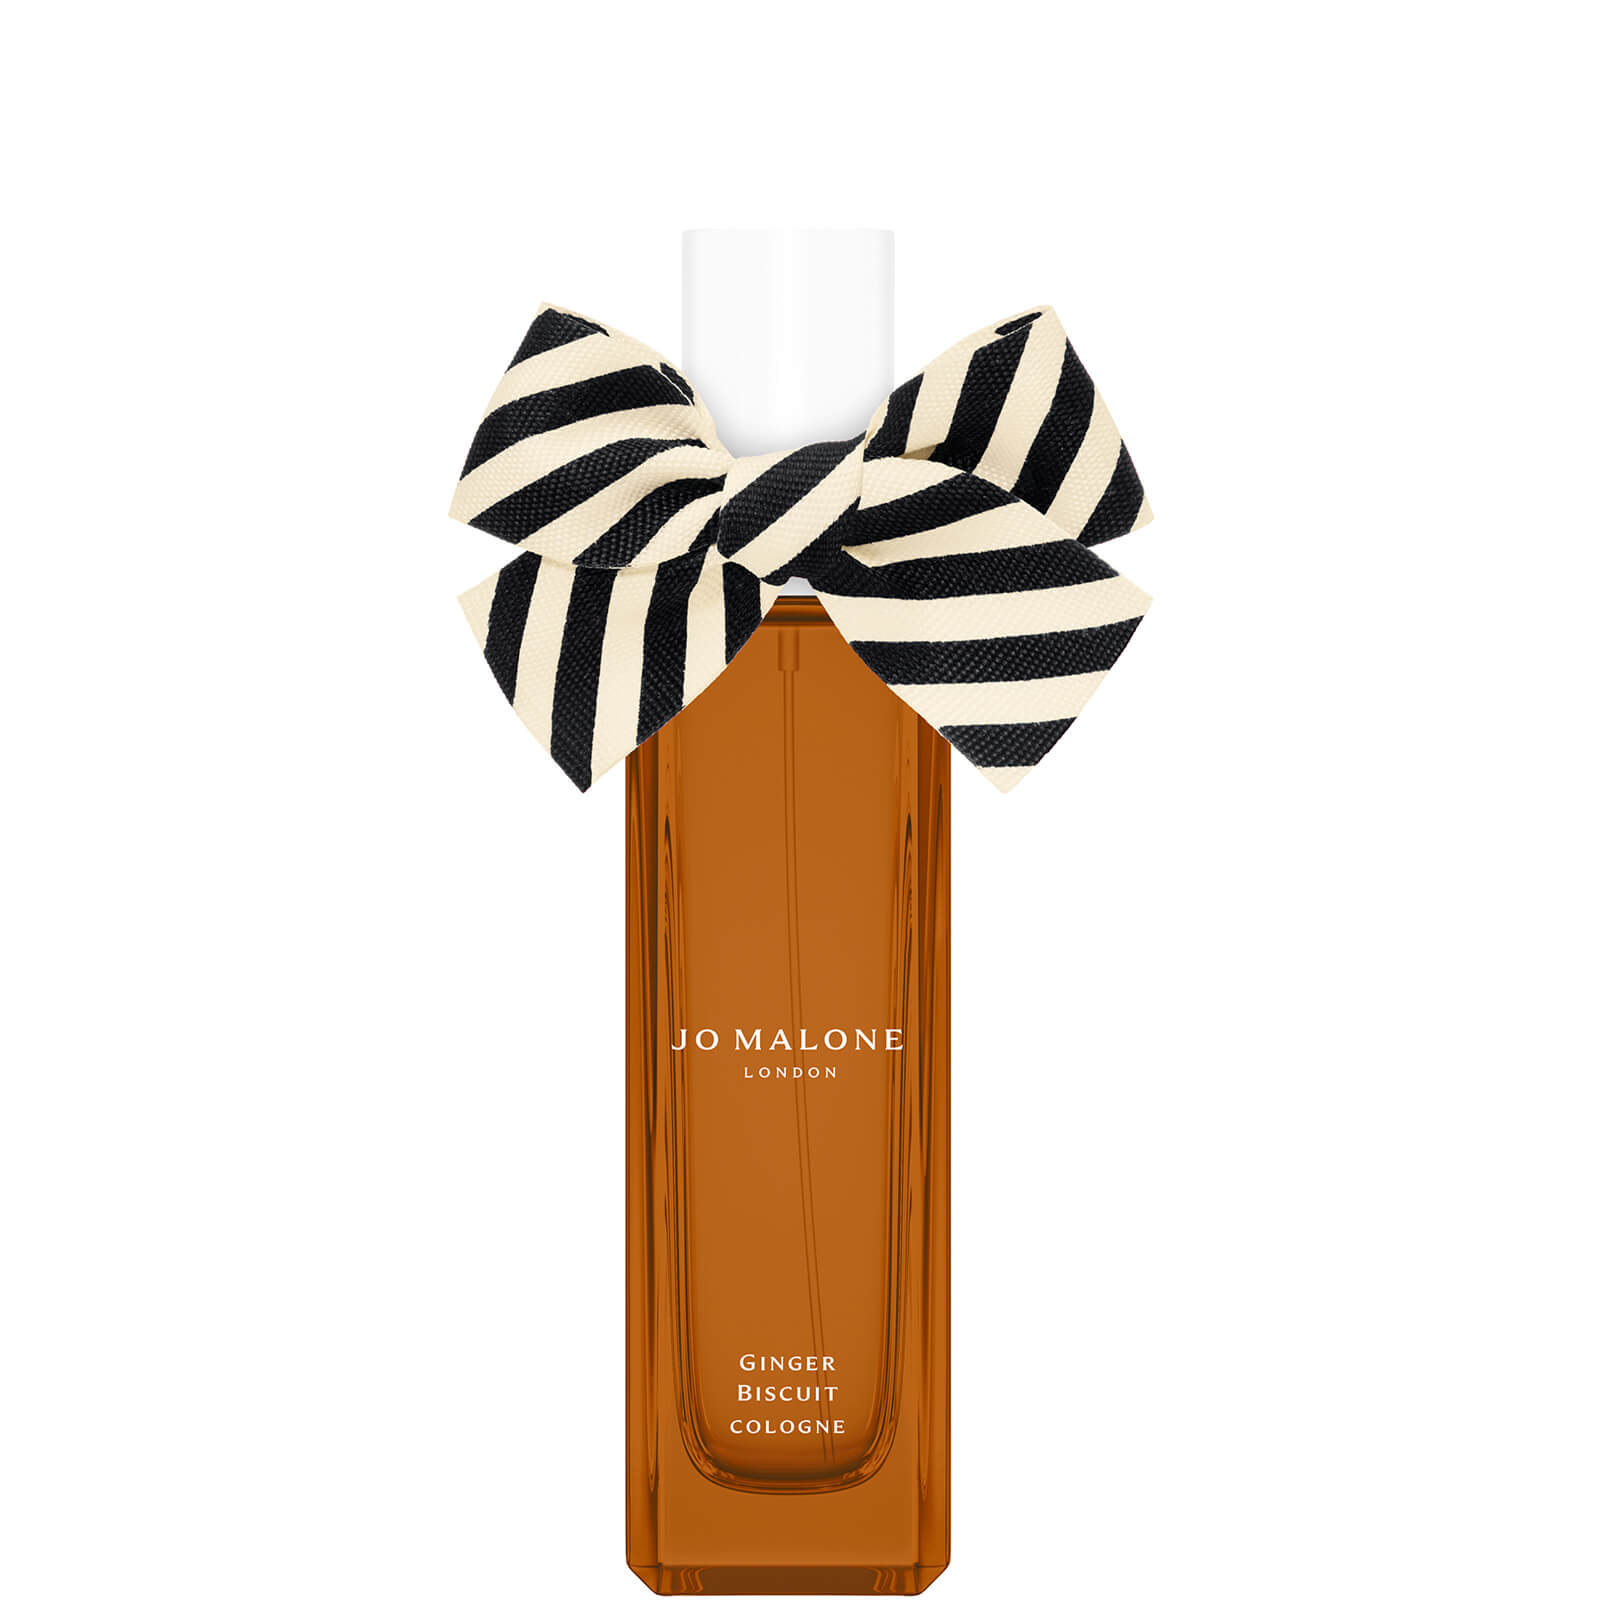 Jo Malone London Ginger Biscuit Cologne 30ml